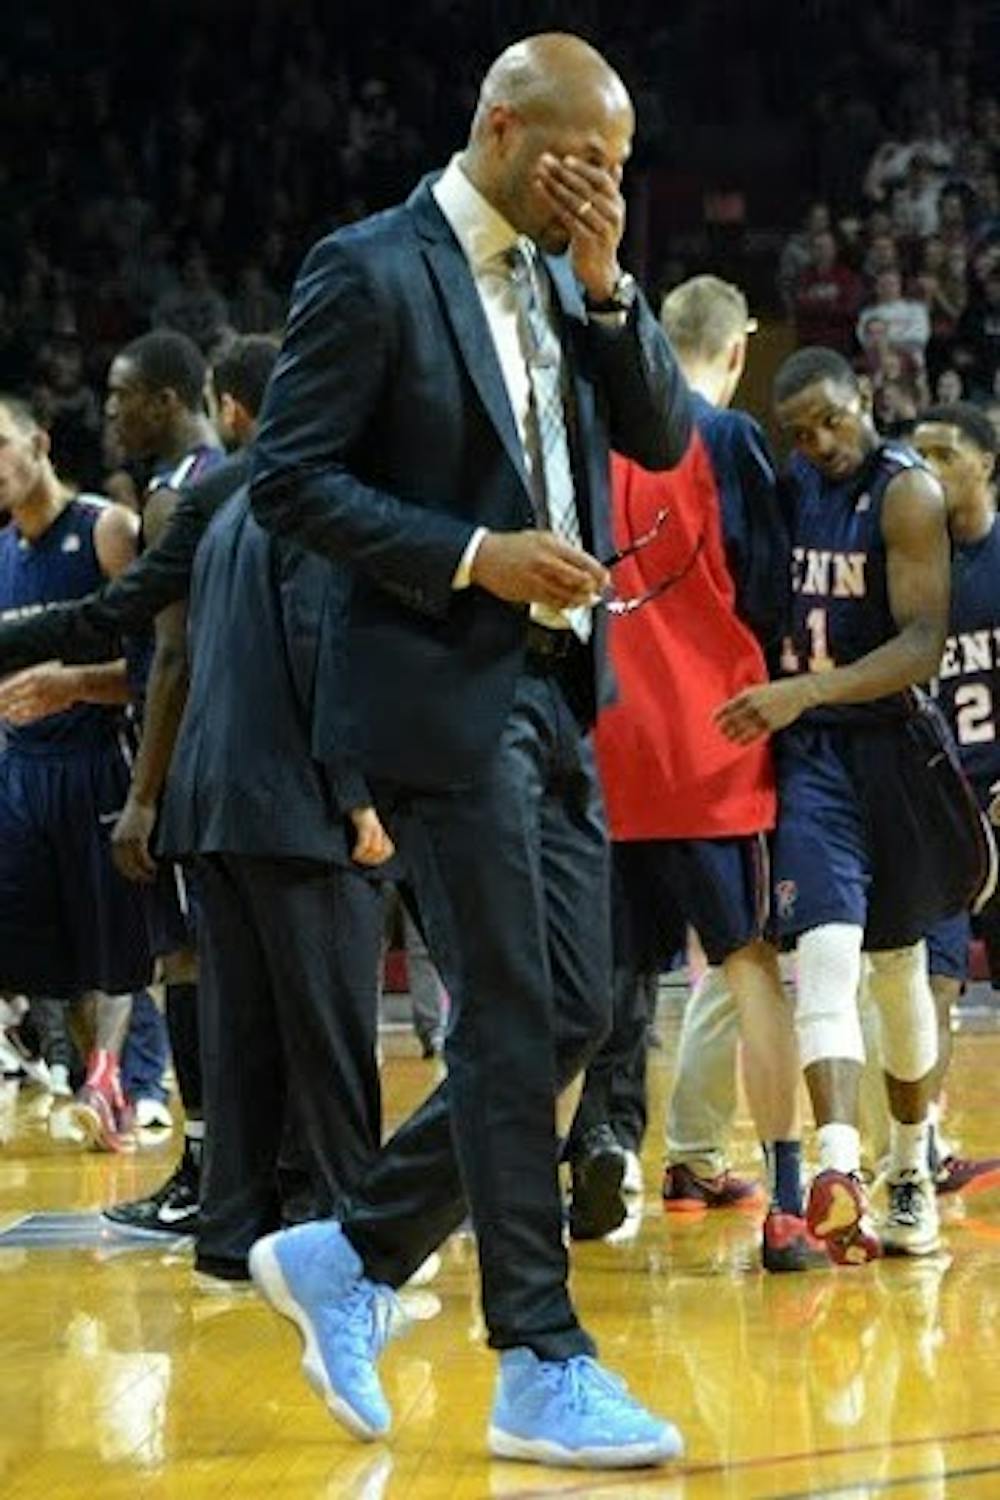 After five and a half seasons at the helm of Penn basketball, coach Jerome Allen will not return to the program next season, a development that has upset many former players and teammates.